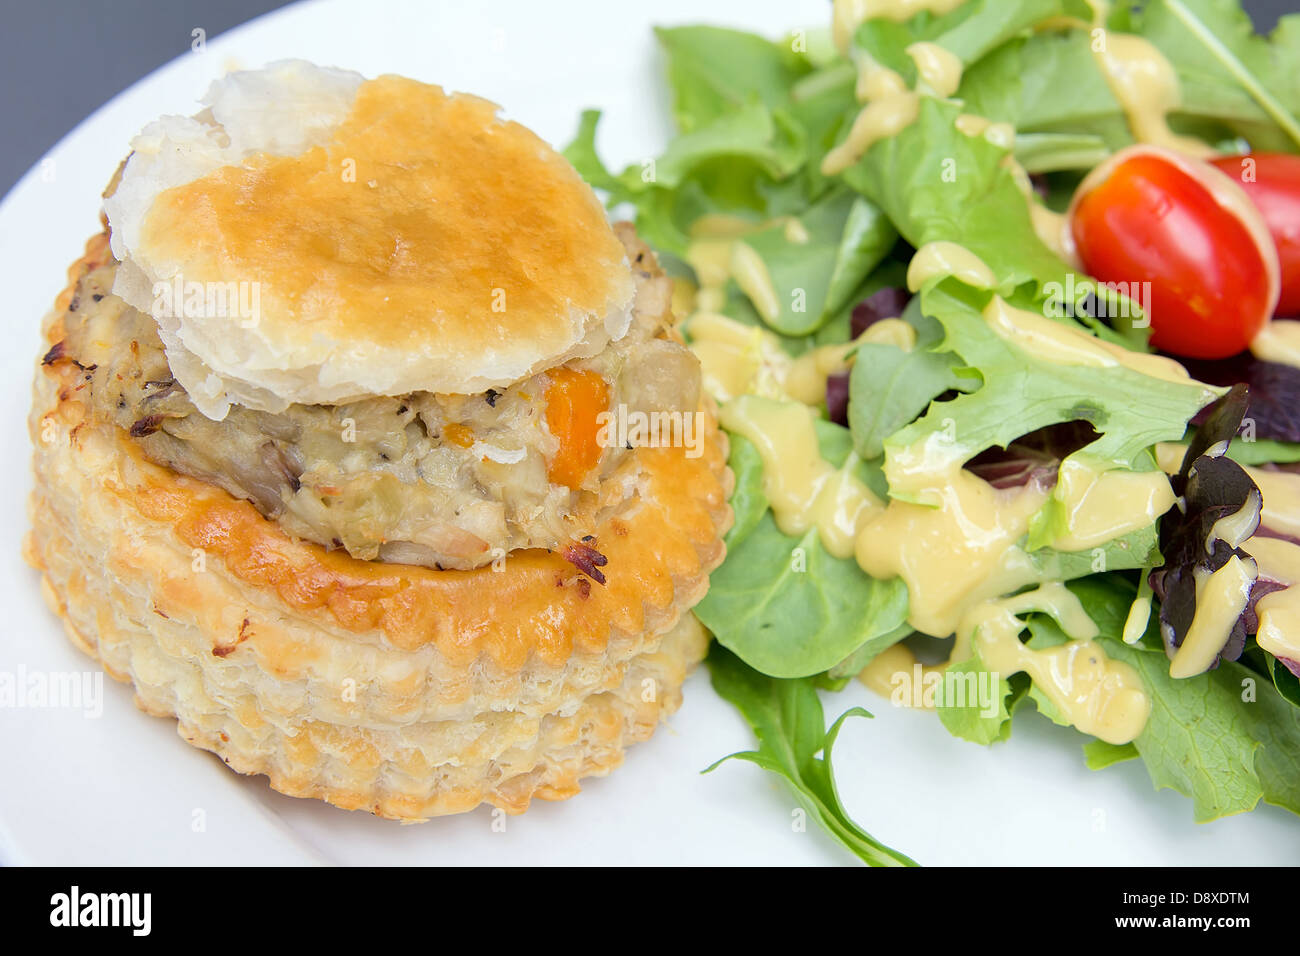 Chicken Pot Pie with Leafy Green Vegetables Tomatoes and Salad Dressing Closeup Stock Photo